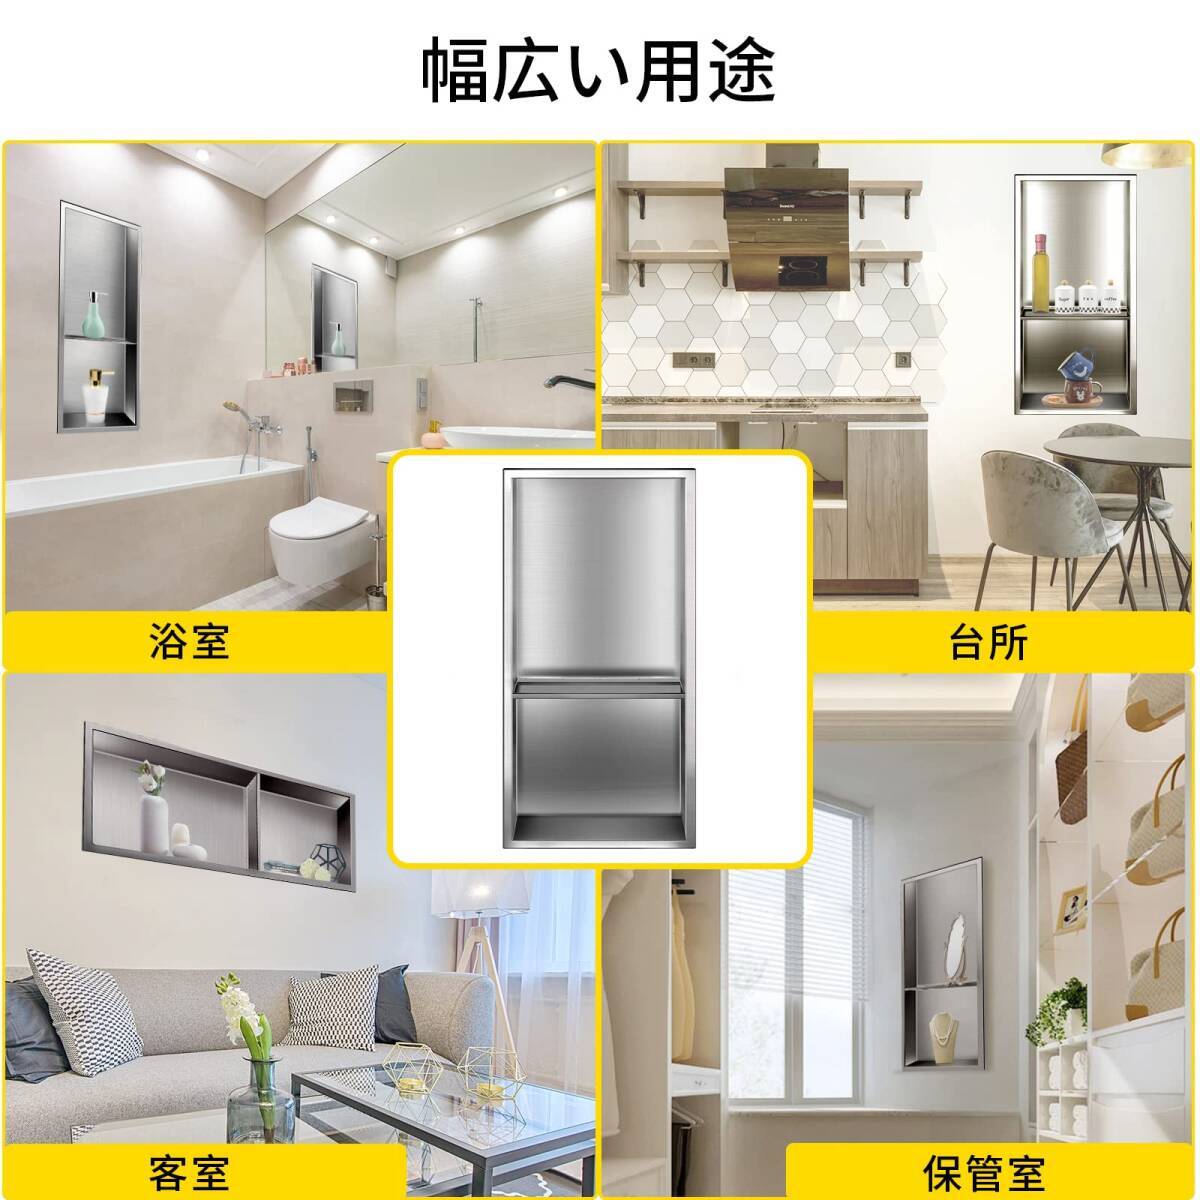 #3491F shower nichi30x60x10cm face washing dresser bus room storage stainless steel cabinet ornament wall mount installation easy bus room 